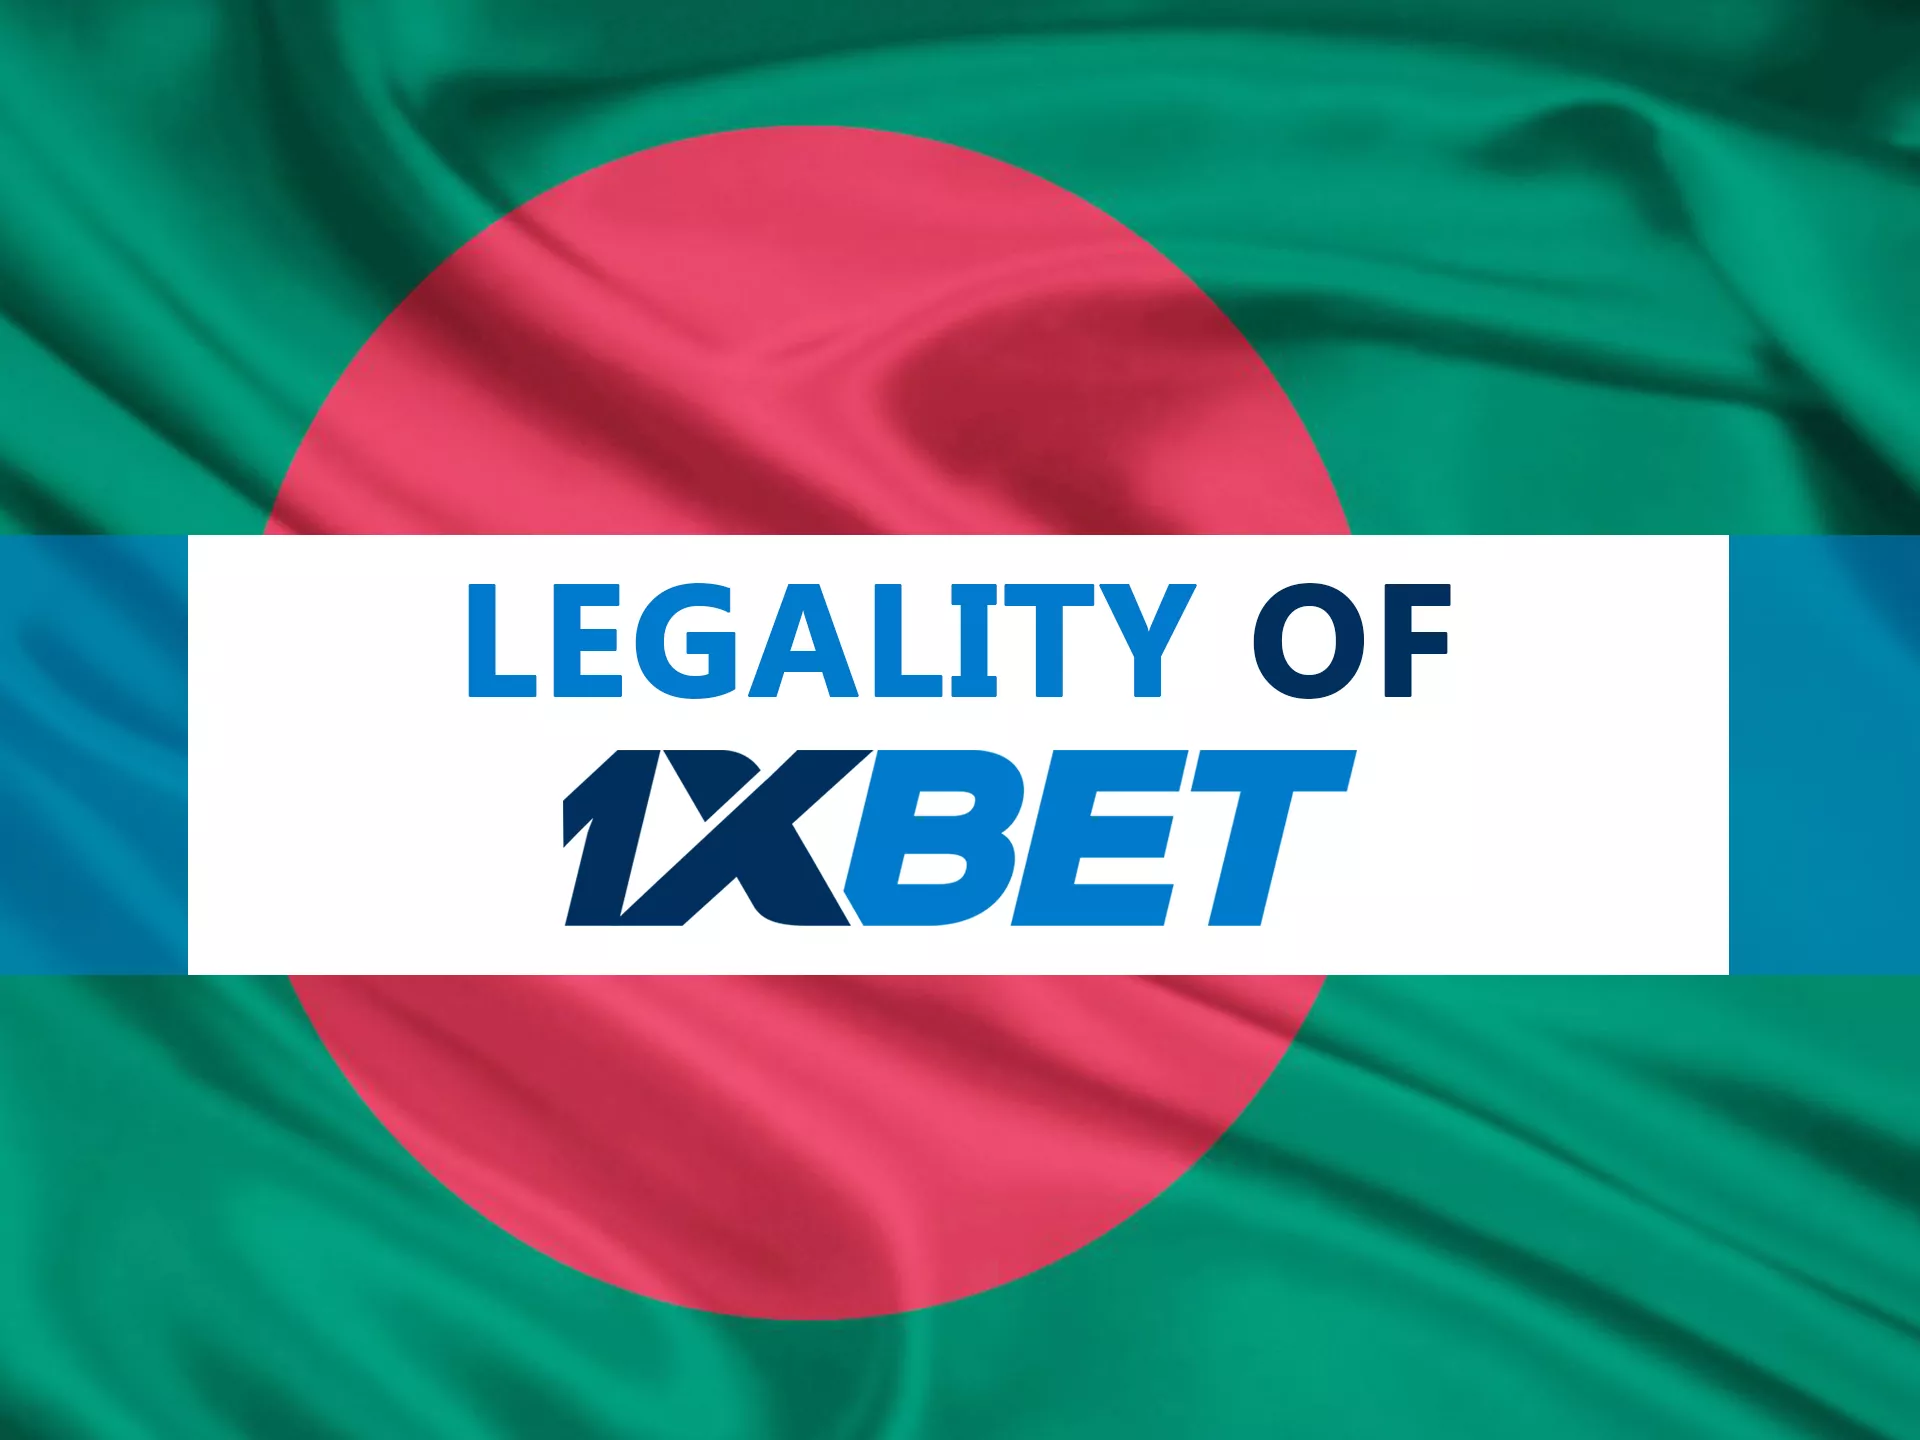 1xbet is safe and absolutely legal online betting site in Bangladesh.